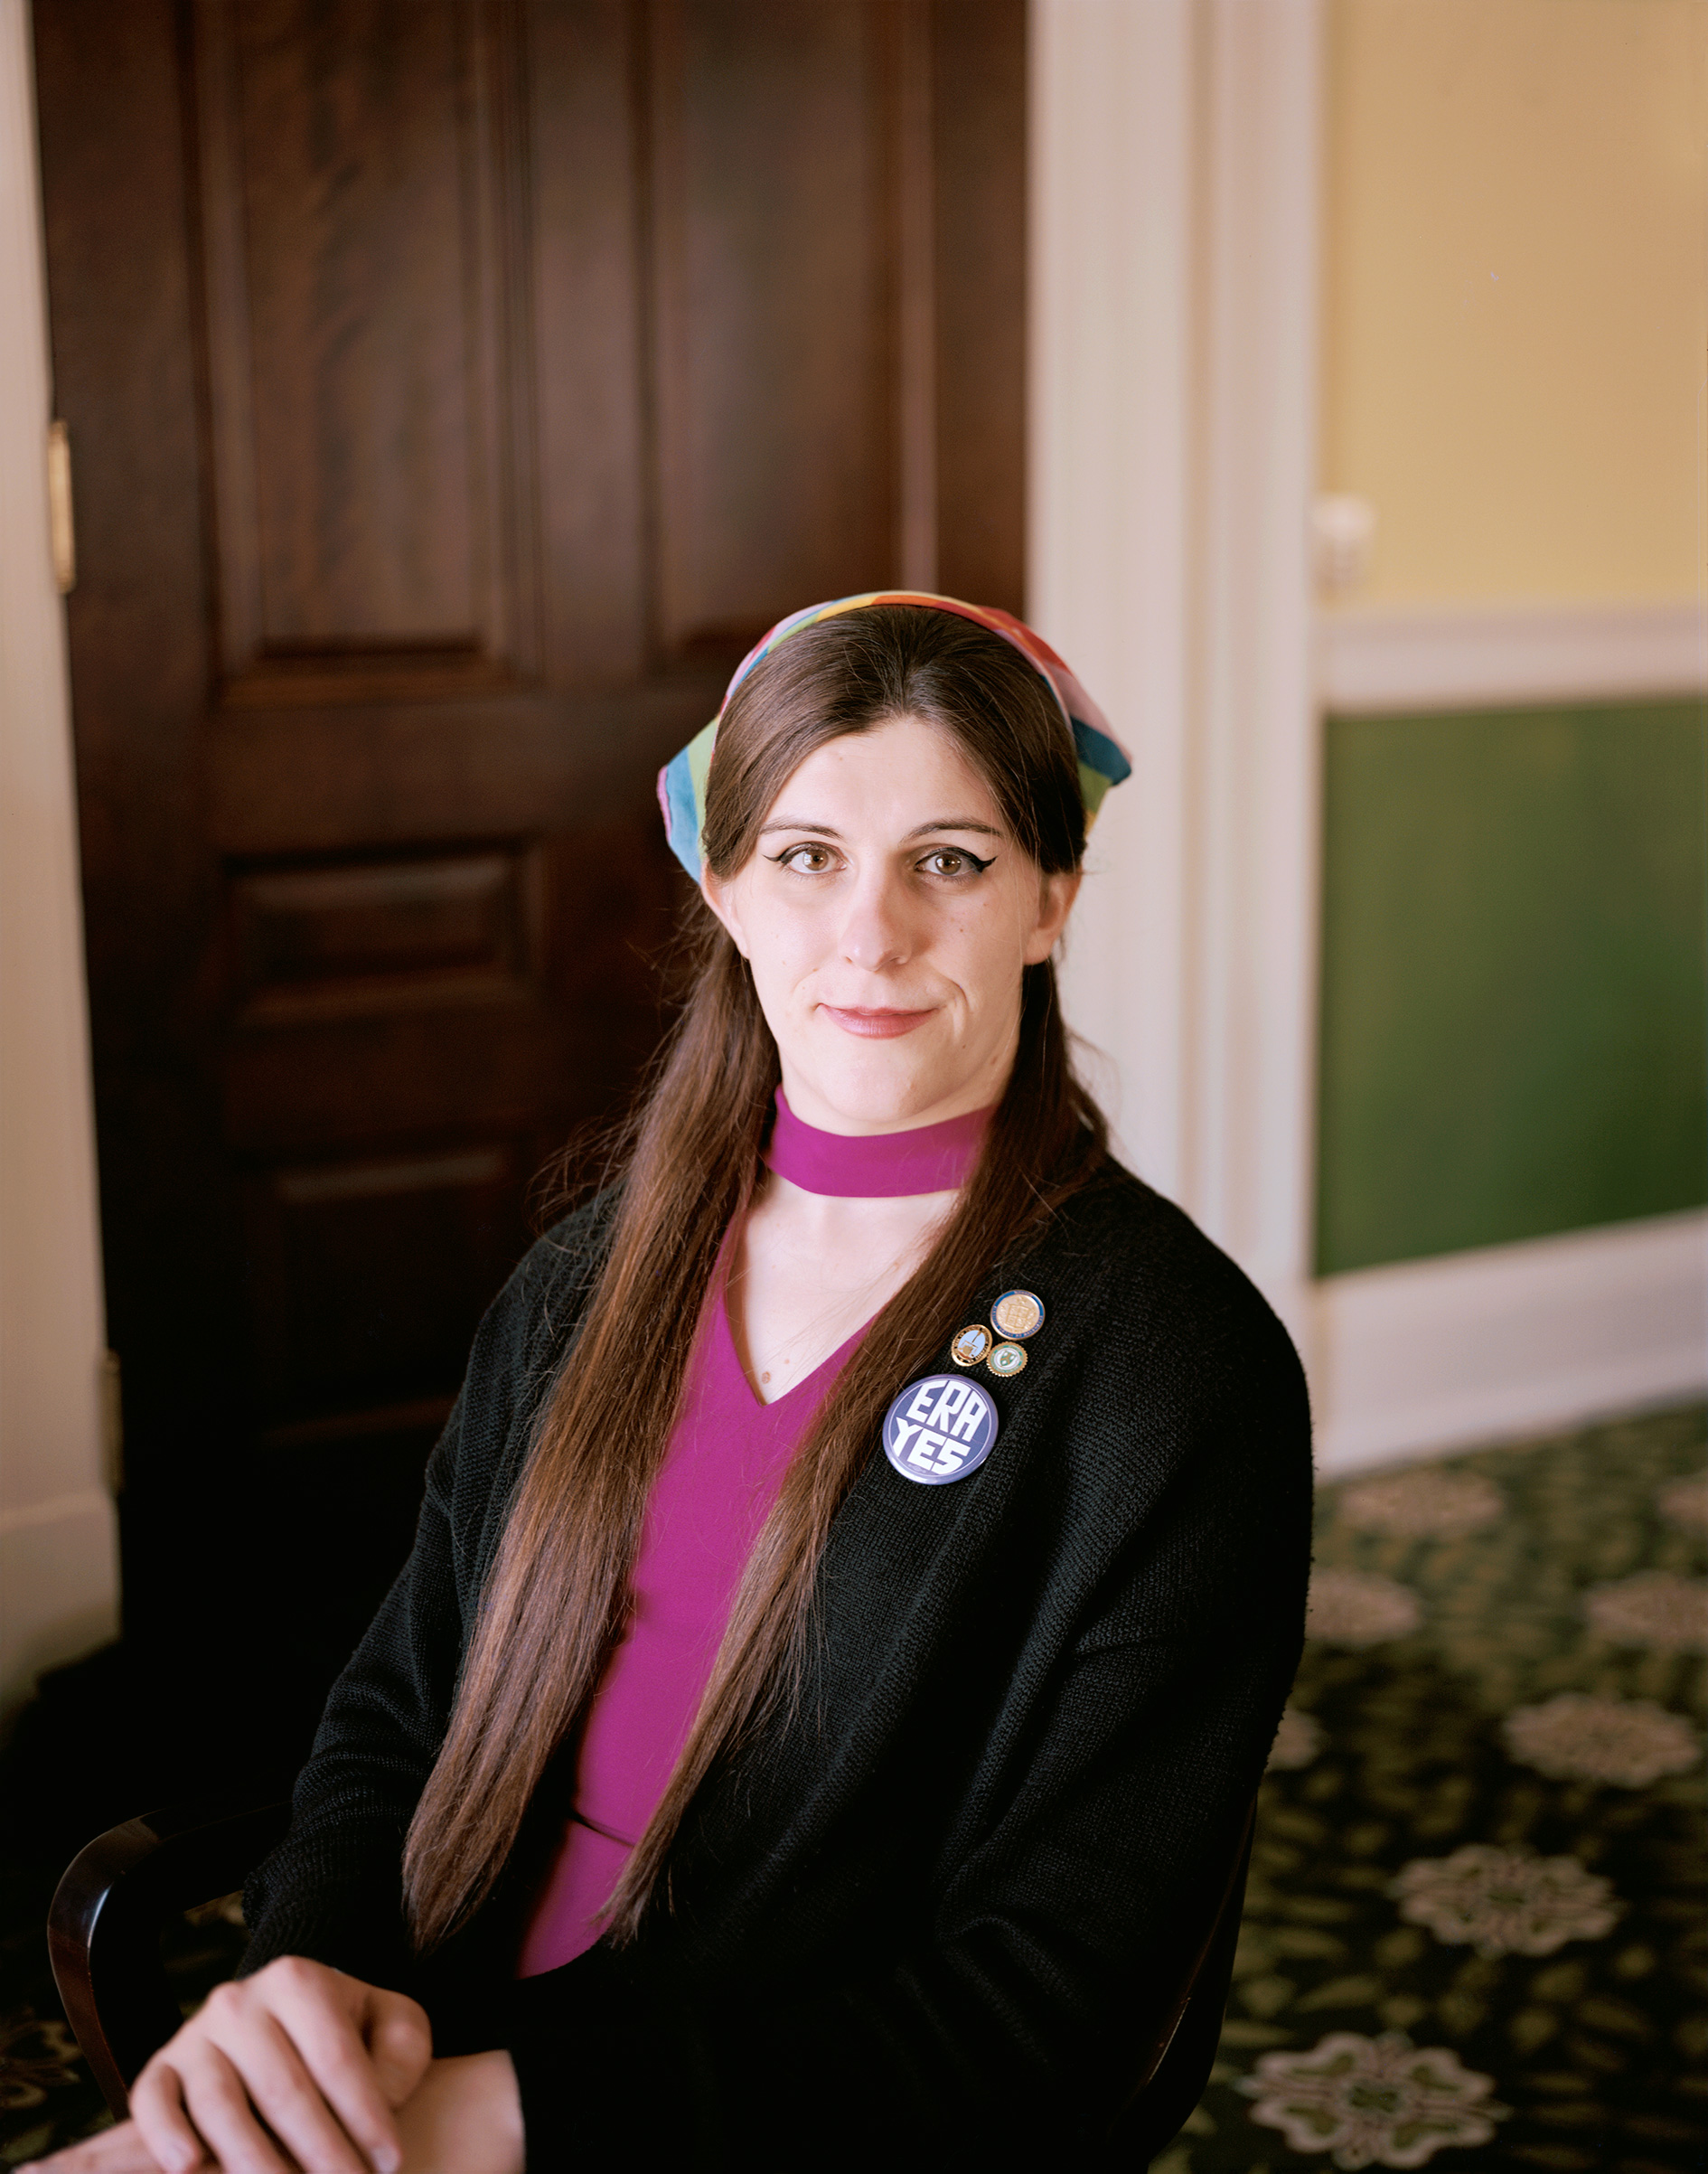 Del. Danica Roem at the Virginia State Capitol in Richmond, Va., May 10, 2018. (Susan Worsham for TIME)